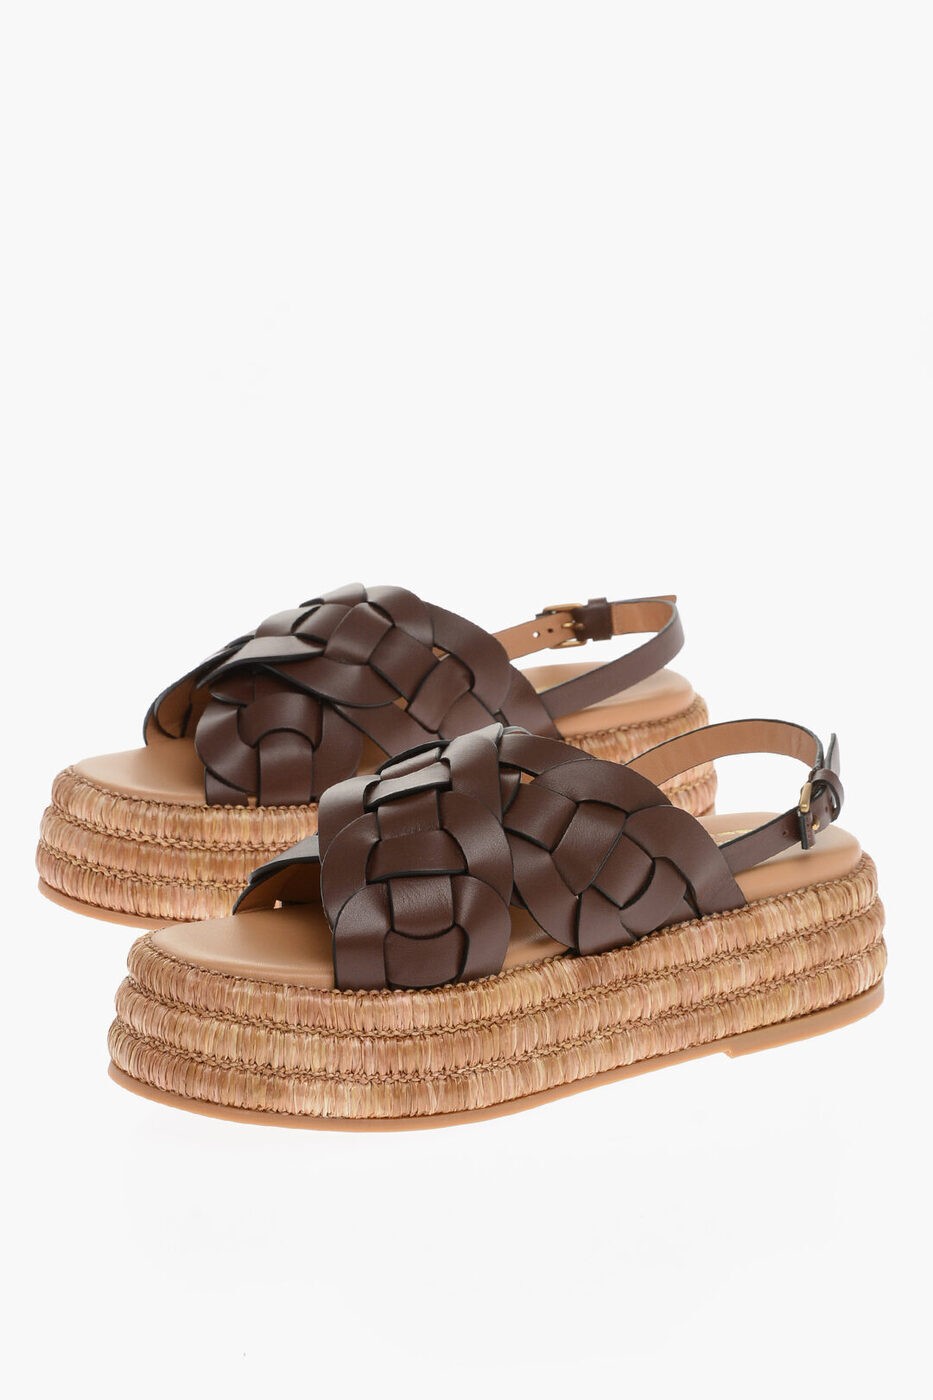 TOD'S トッズ パンプス XXW72K0GS70 MID S202 レディース BRAIDED LEATHER SANDALS WITH RAFFIA SOLE AND PLATFORM 5CM 【関税・送料無料】【ラッピング無料】 dk